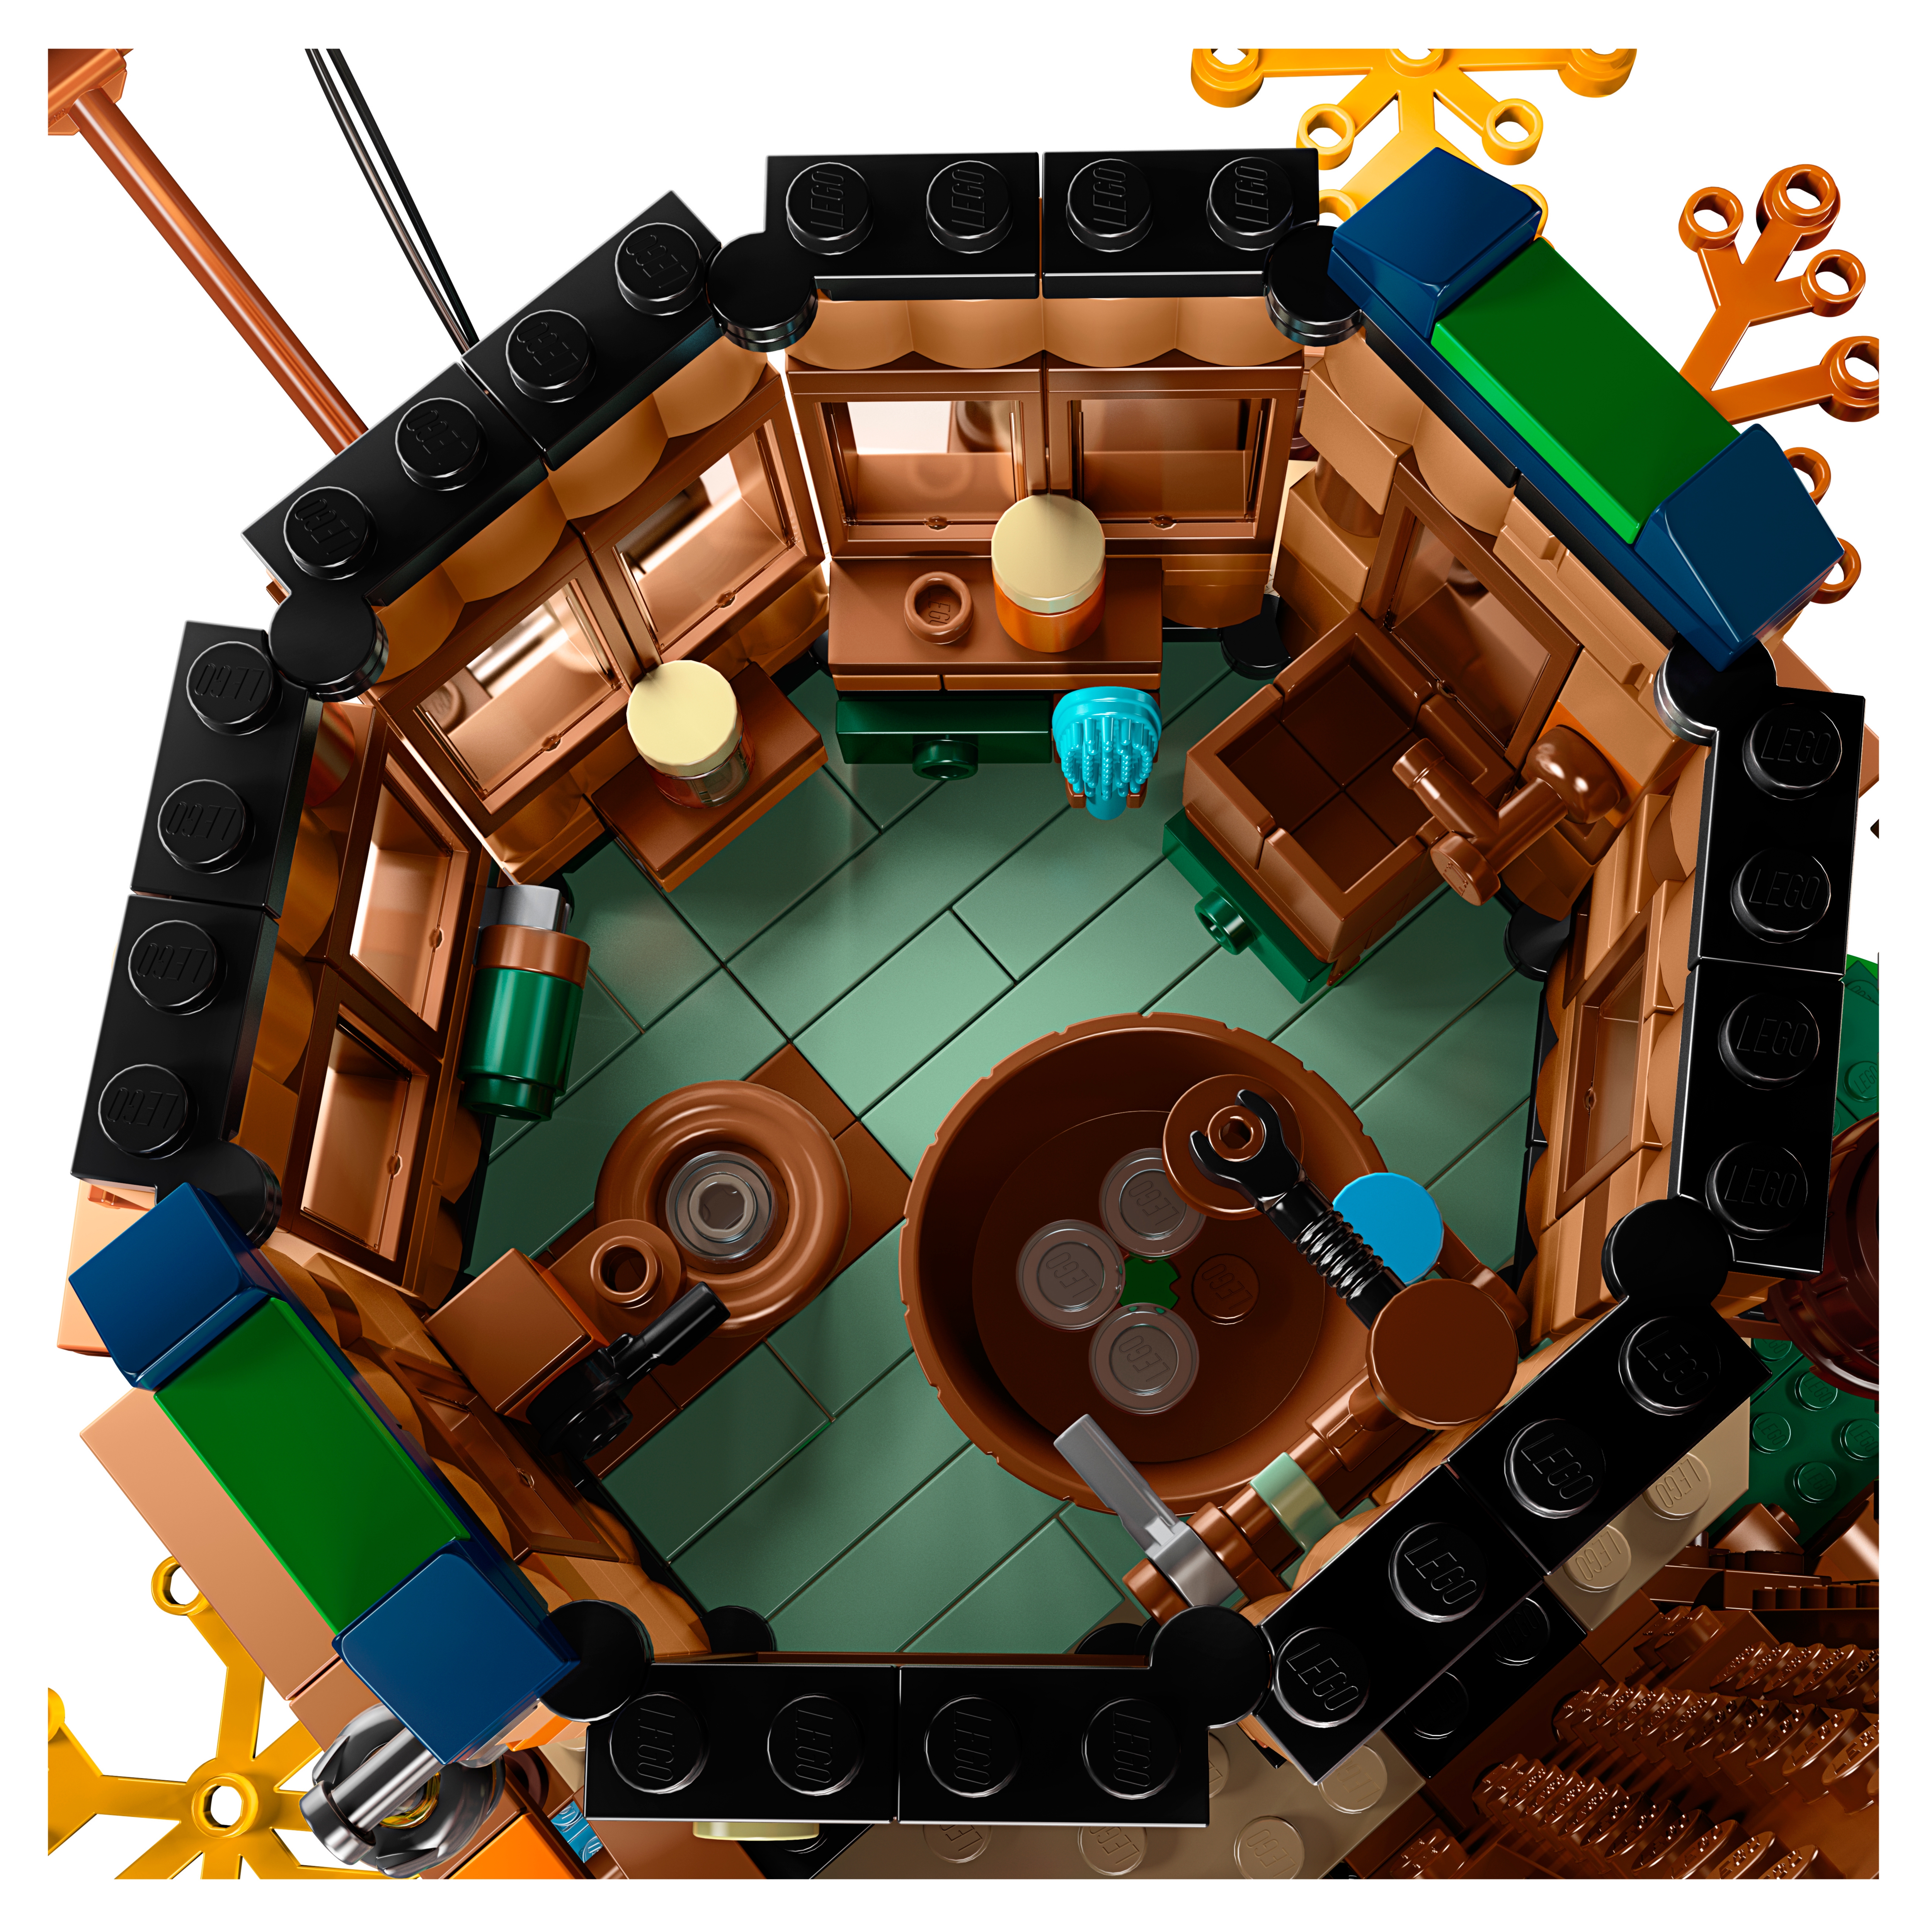 Tree House 21318 | Ideas | Buy online at the Official LEGO® Shop US